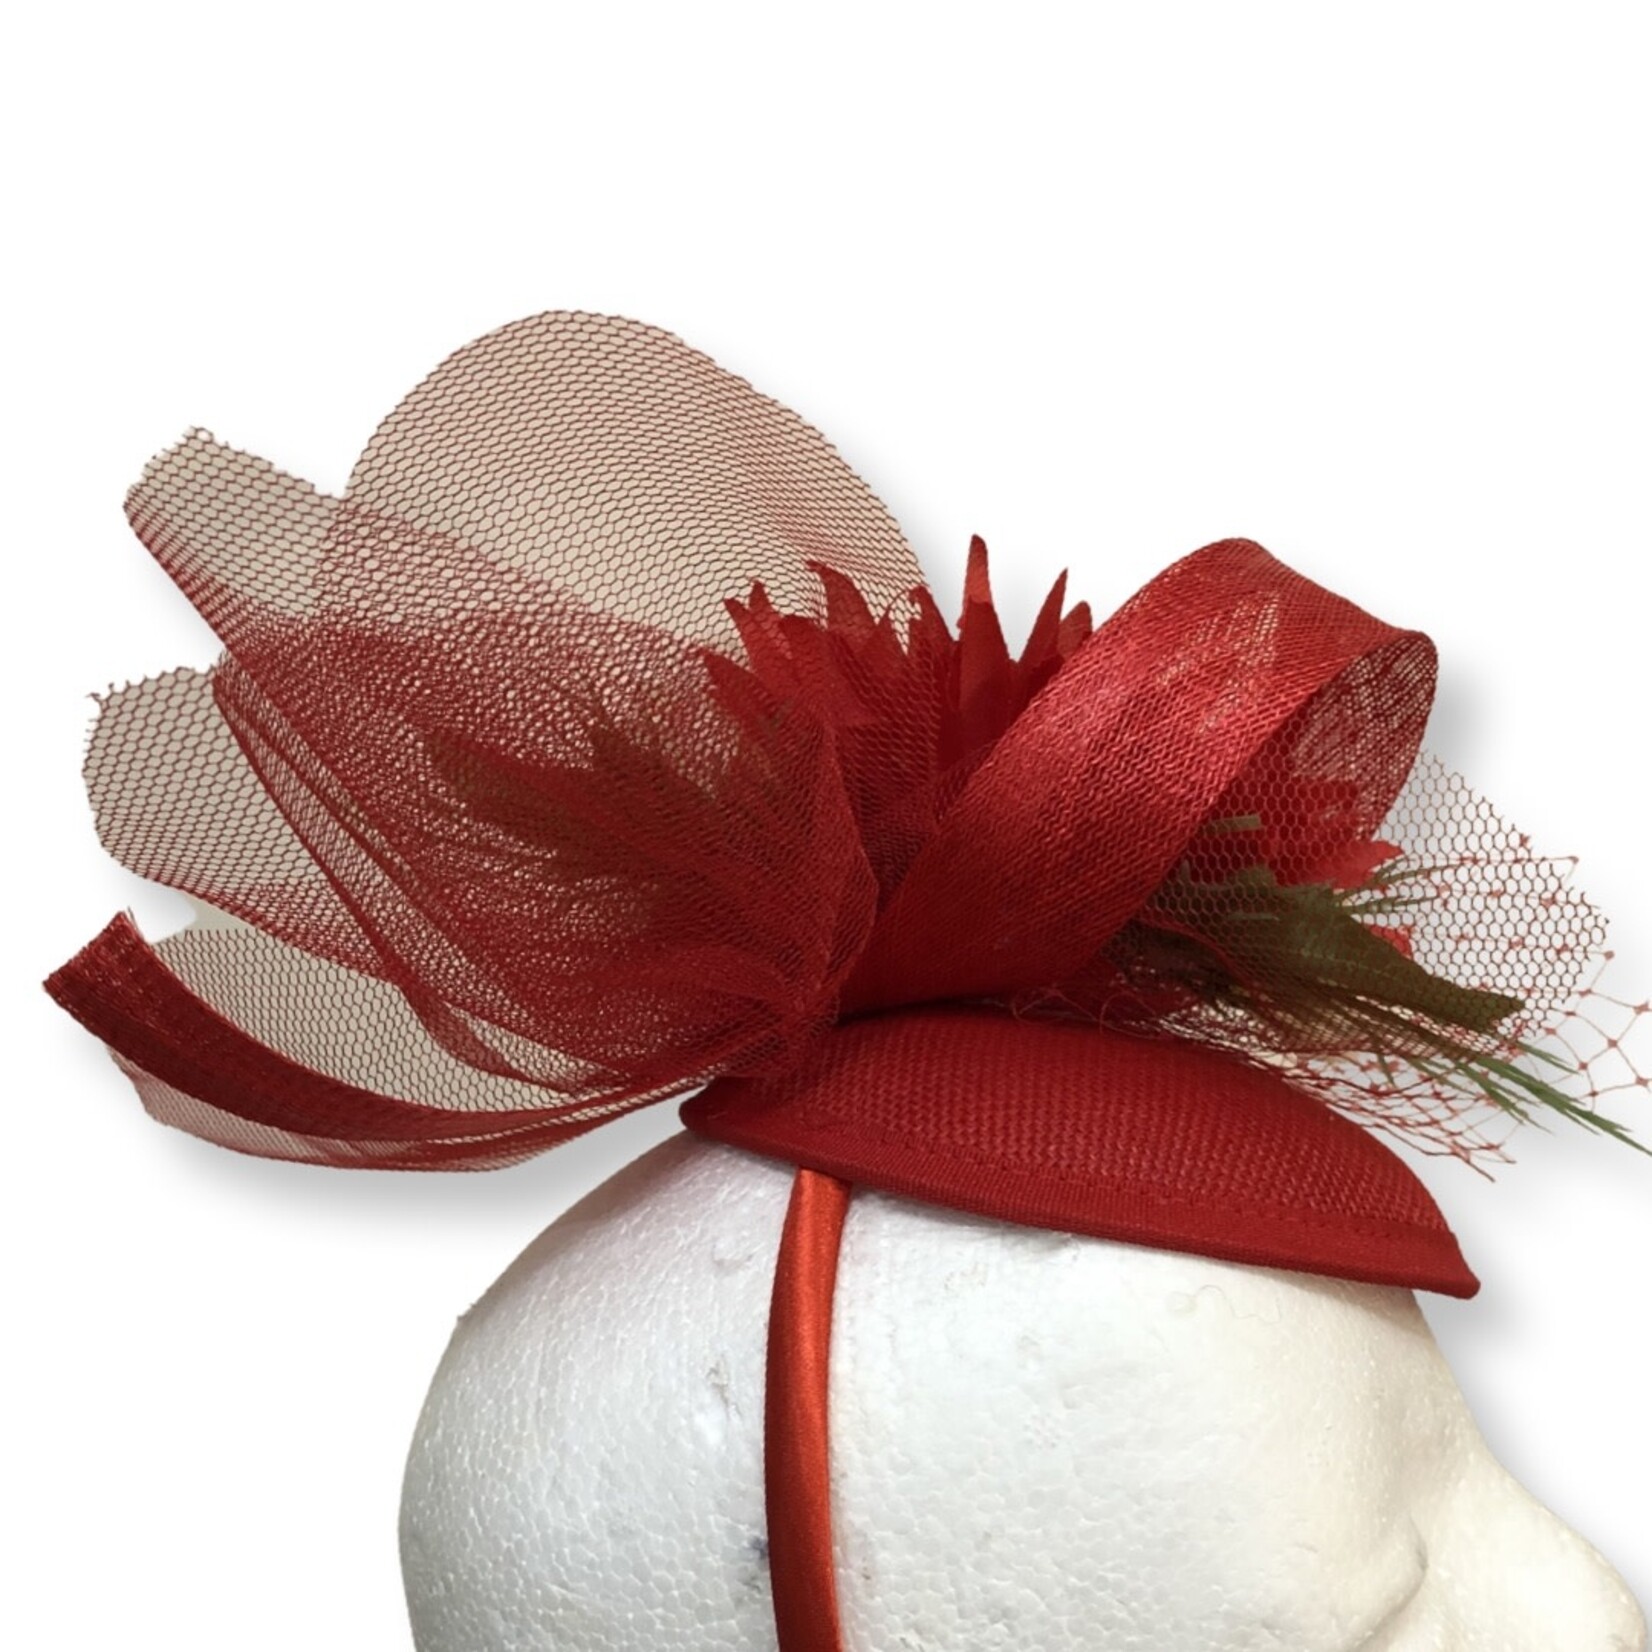 OPO Red & White Floral Hat, Headband Fascinator